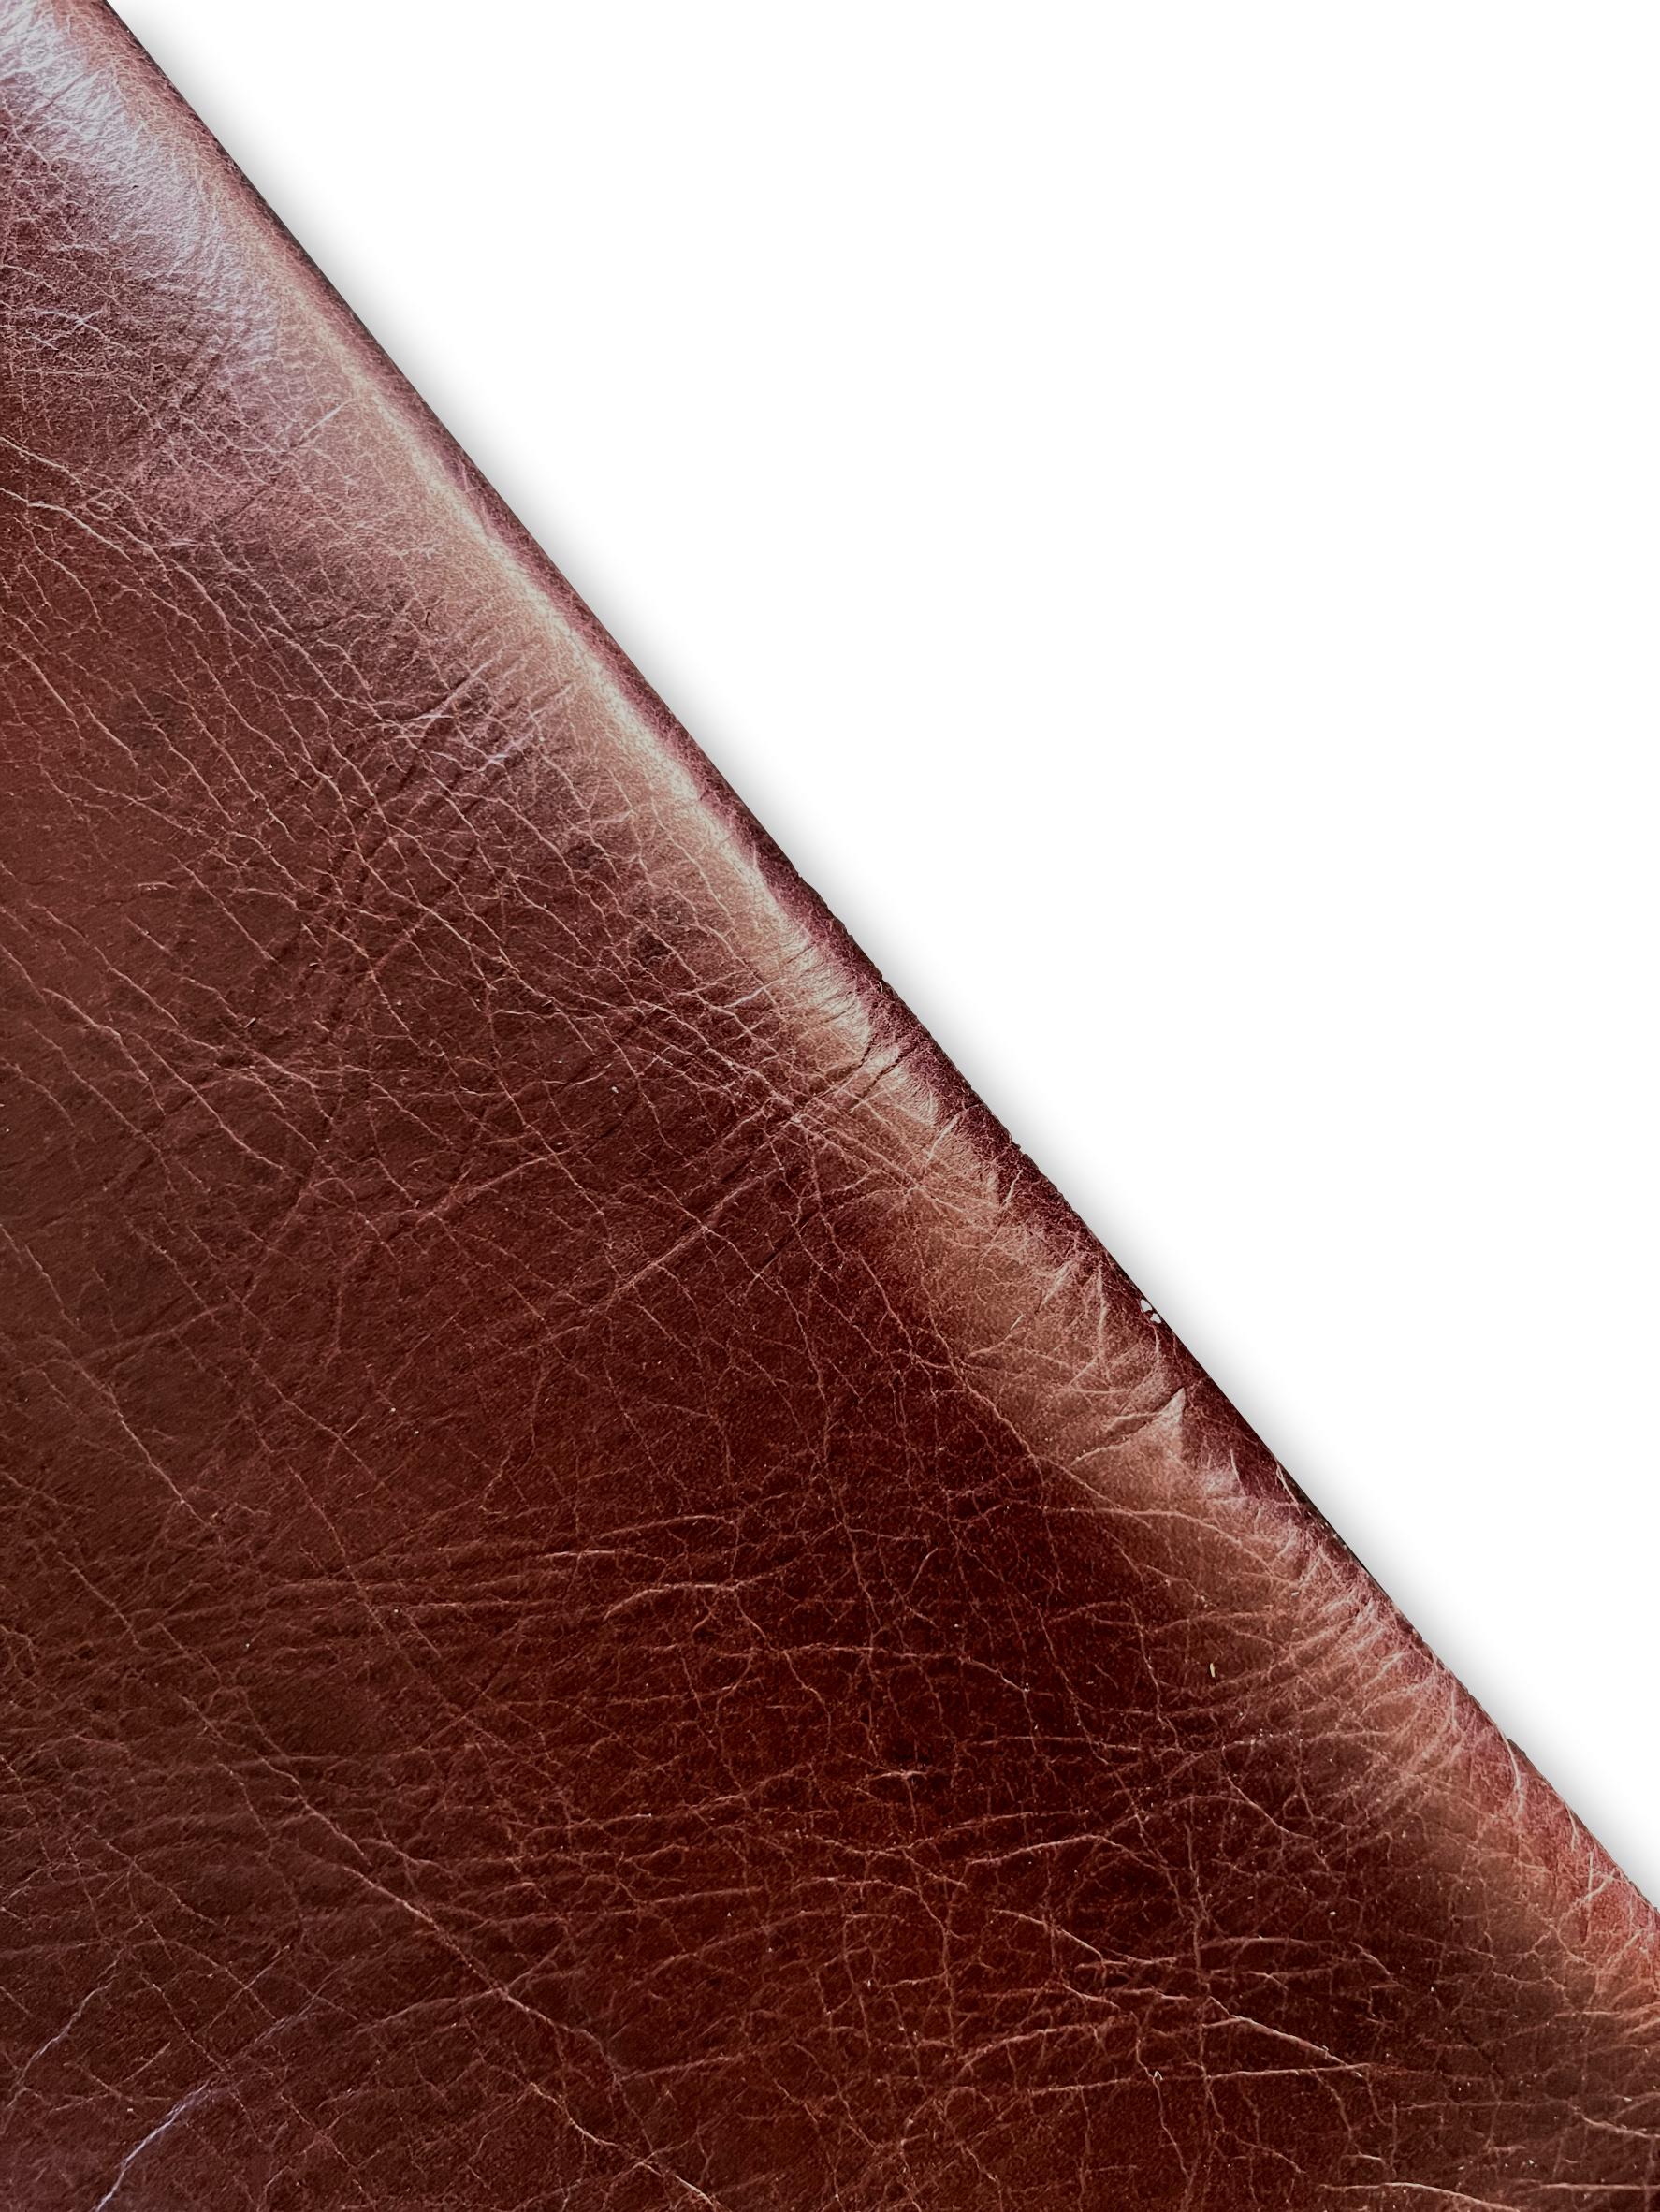 Cognac Large Cow Leather Strips: Sold by the Foot – TanneryNYC